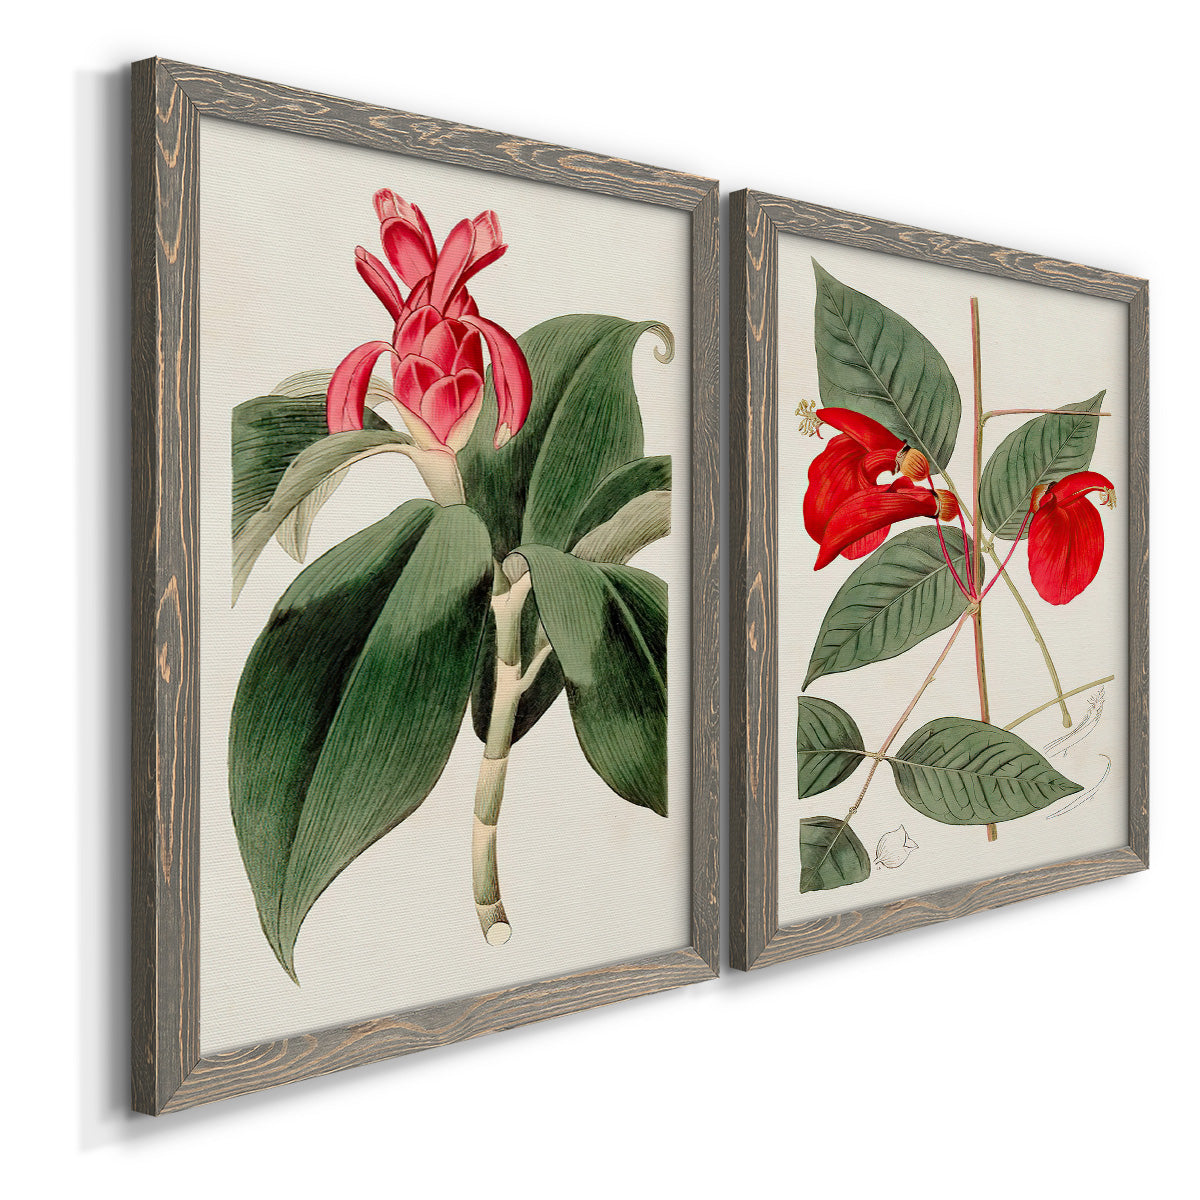 Flora of the Tropics I - Premium Framed Canvas 2 Piece Set - Ready to Hang